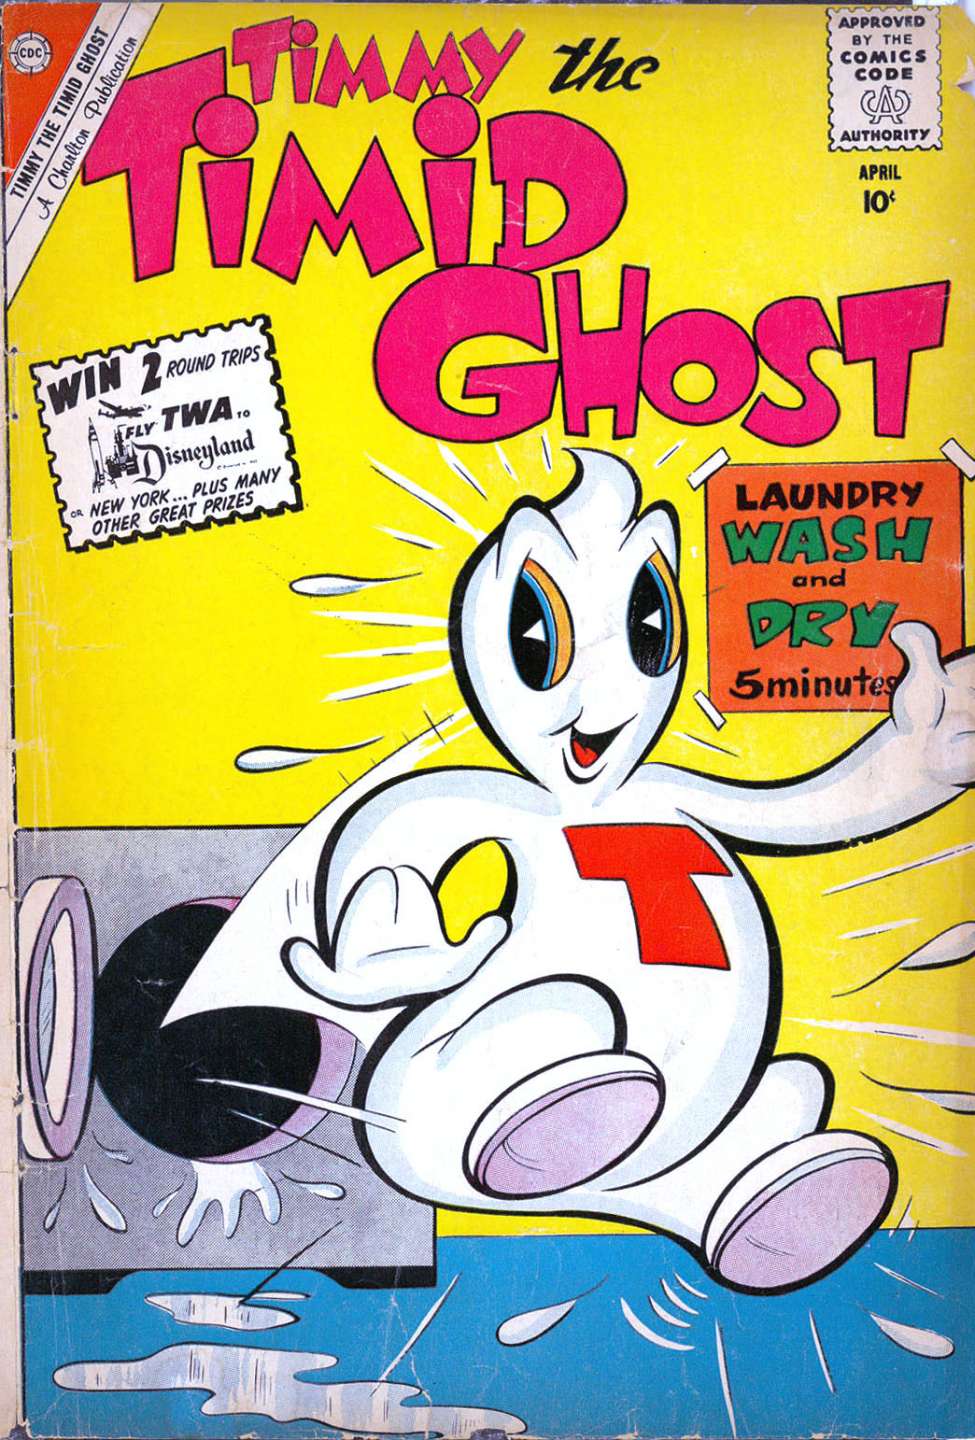 Book Cover For Timmy the Timid Ghost 20 (inc) - Version 2